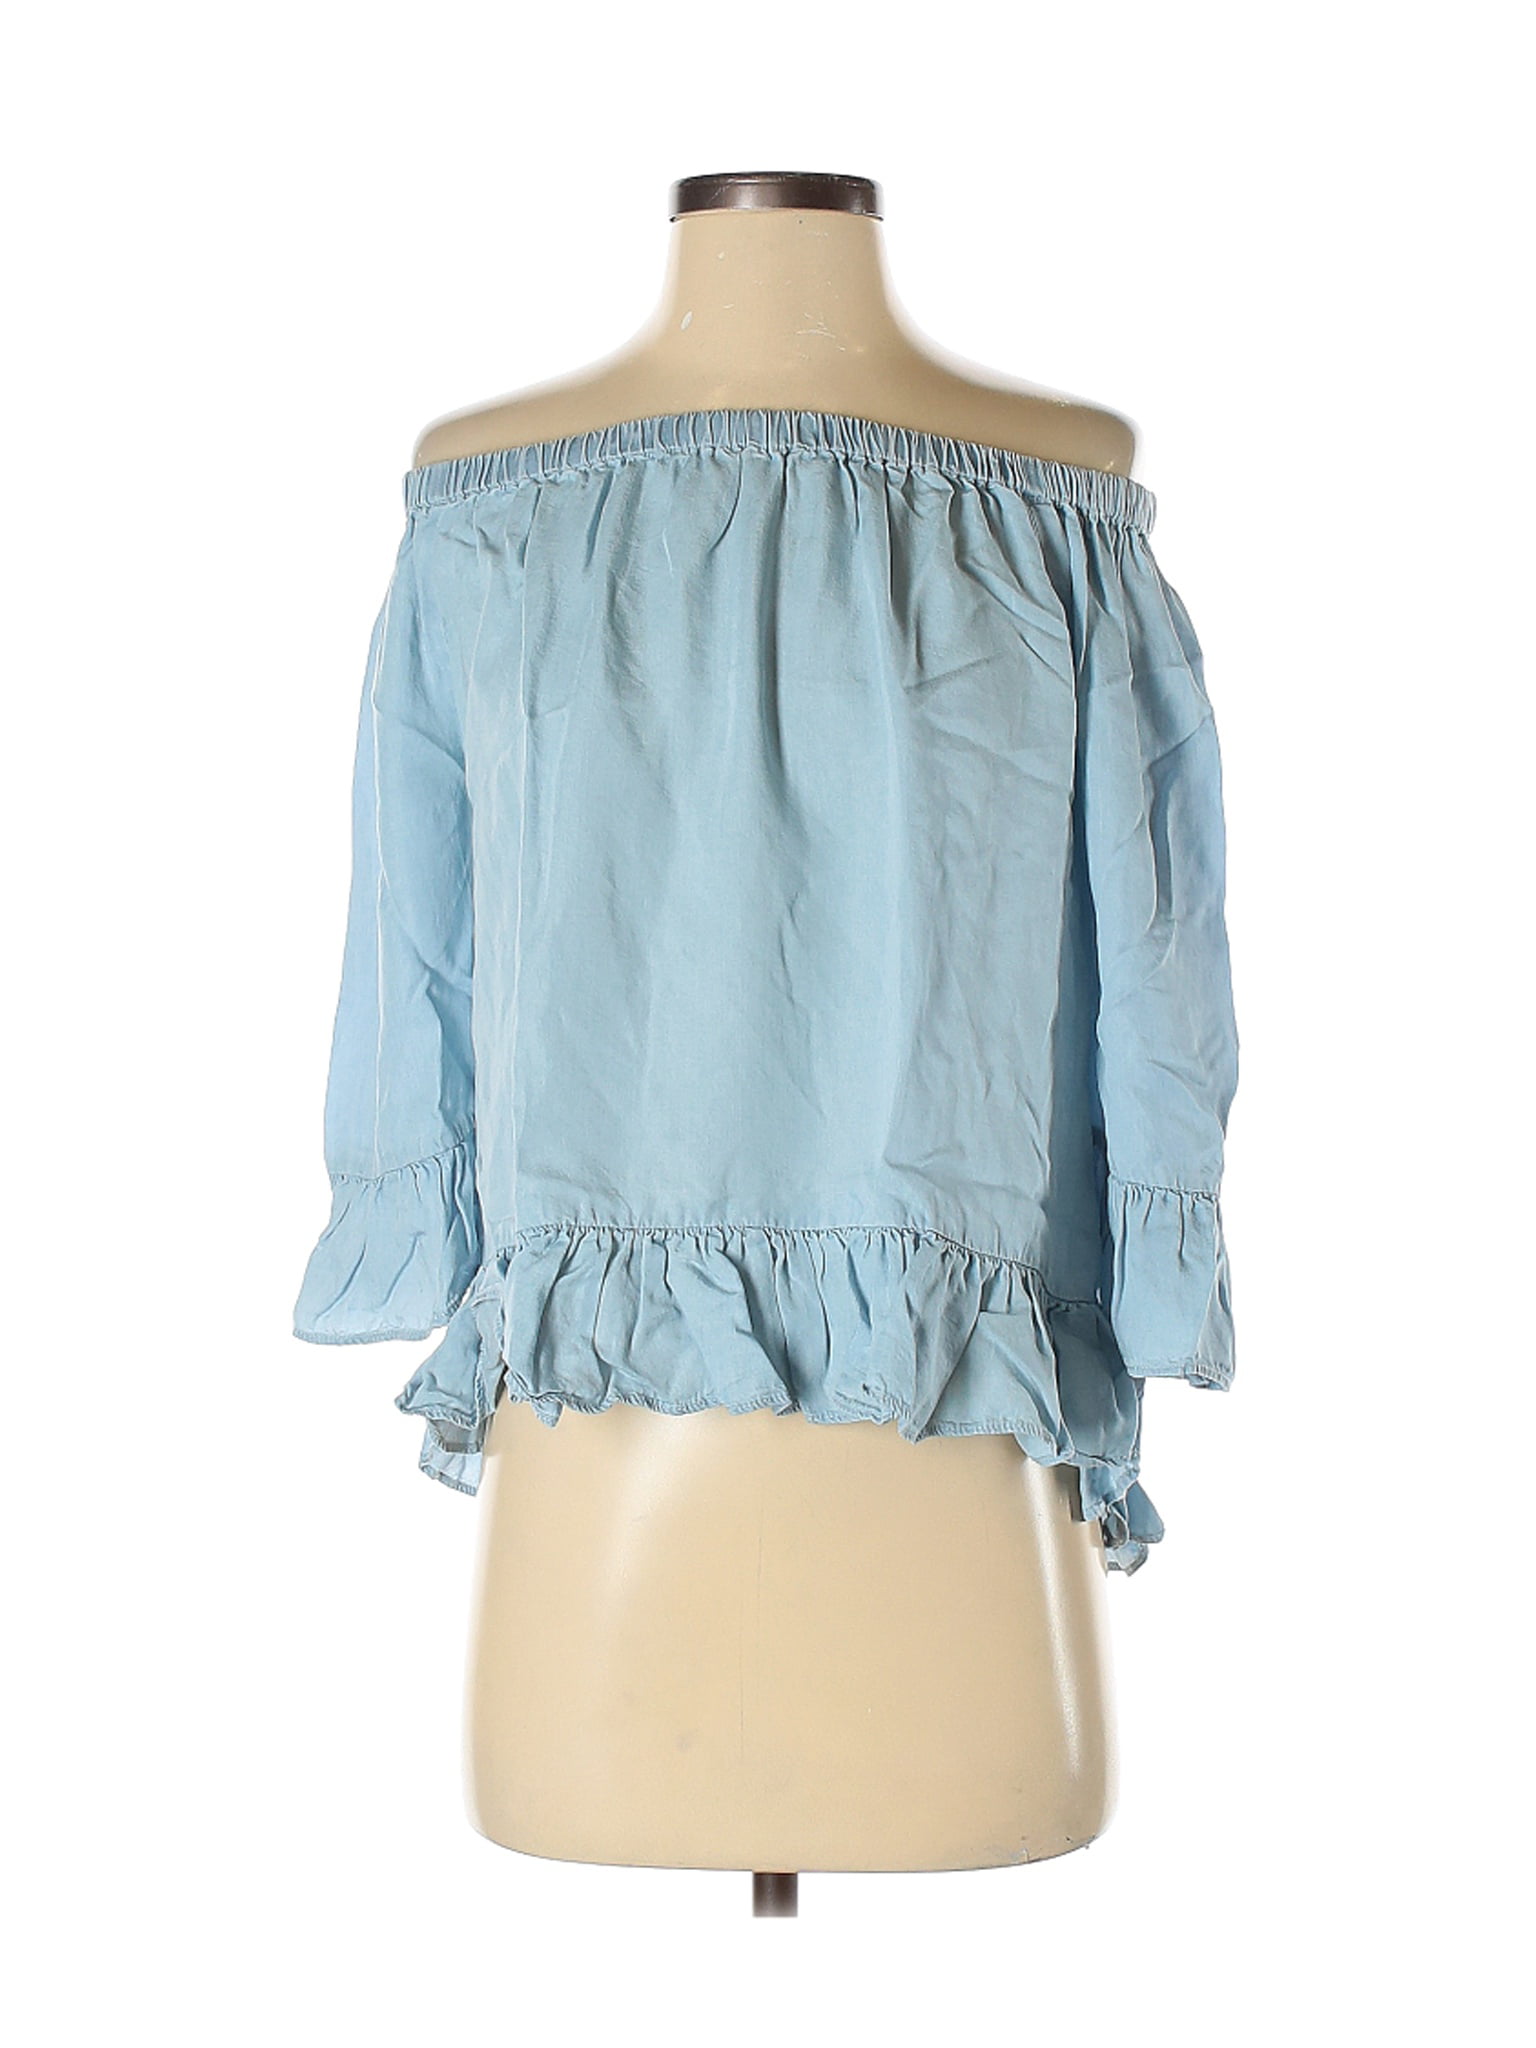 Jane and Delancey - Pre-Owned Jane and Delancey Women's Size S 3/4 ...